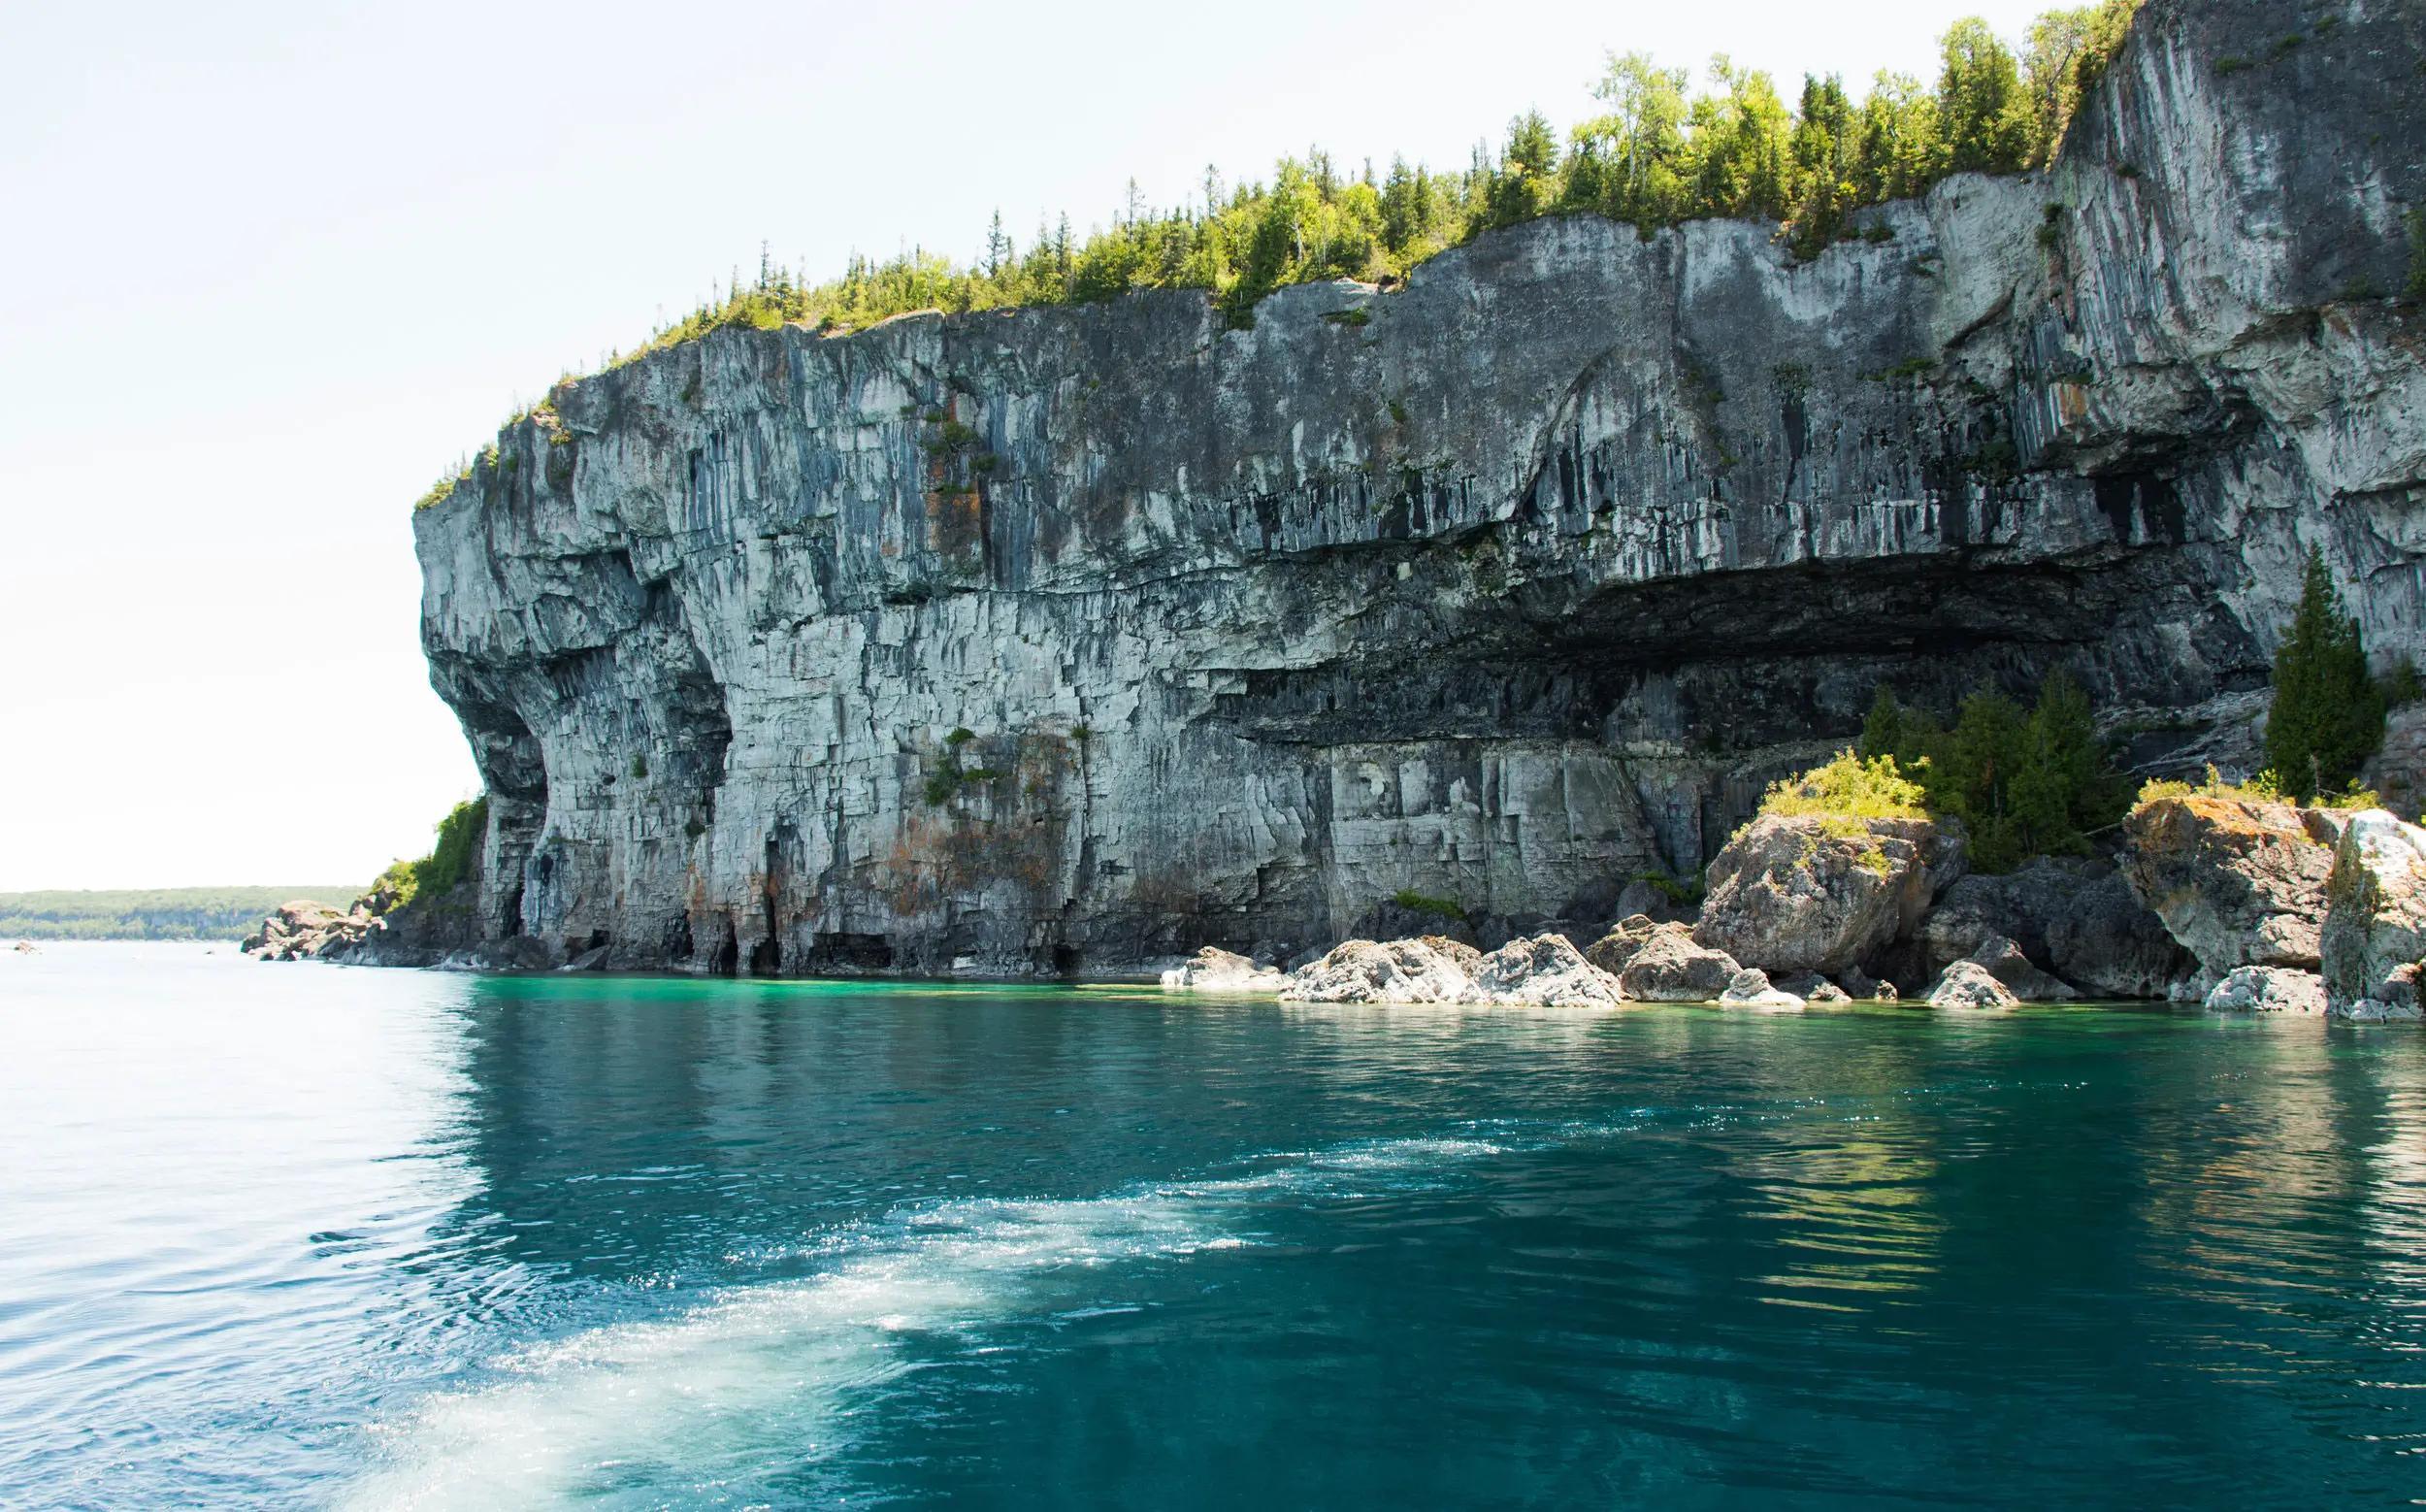 A large rocky cliff overlooking clear, blue water.